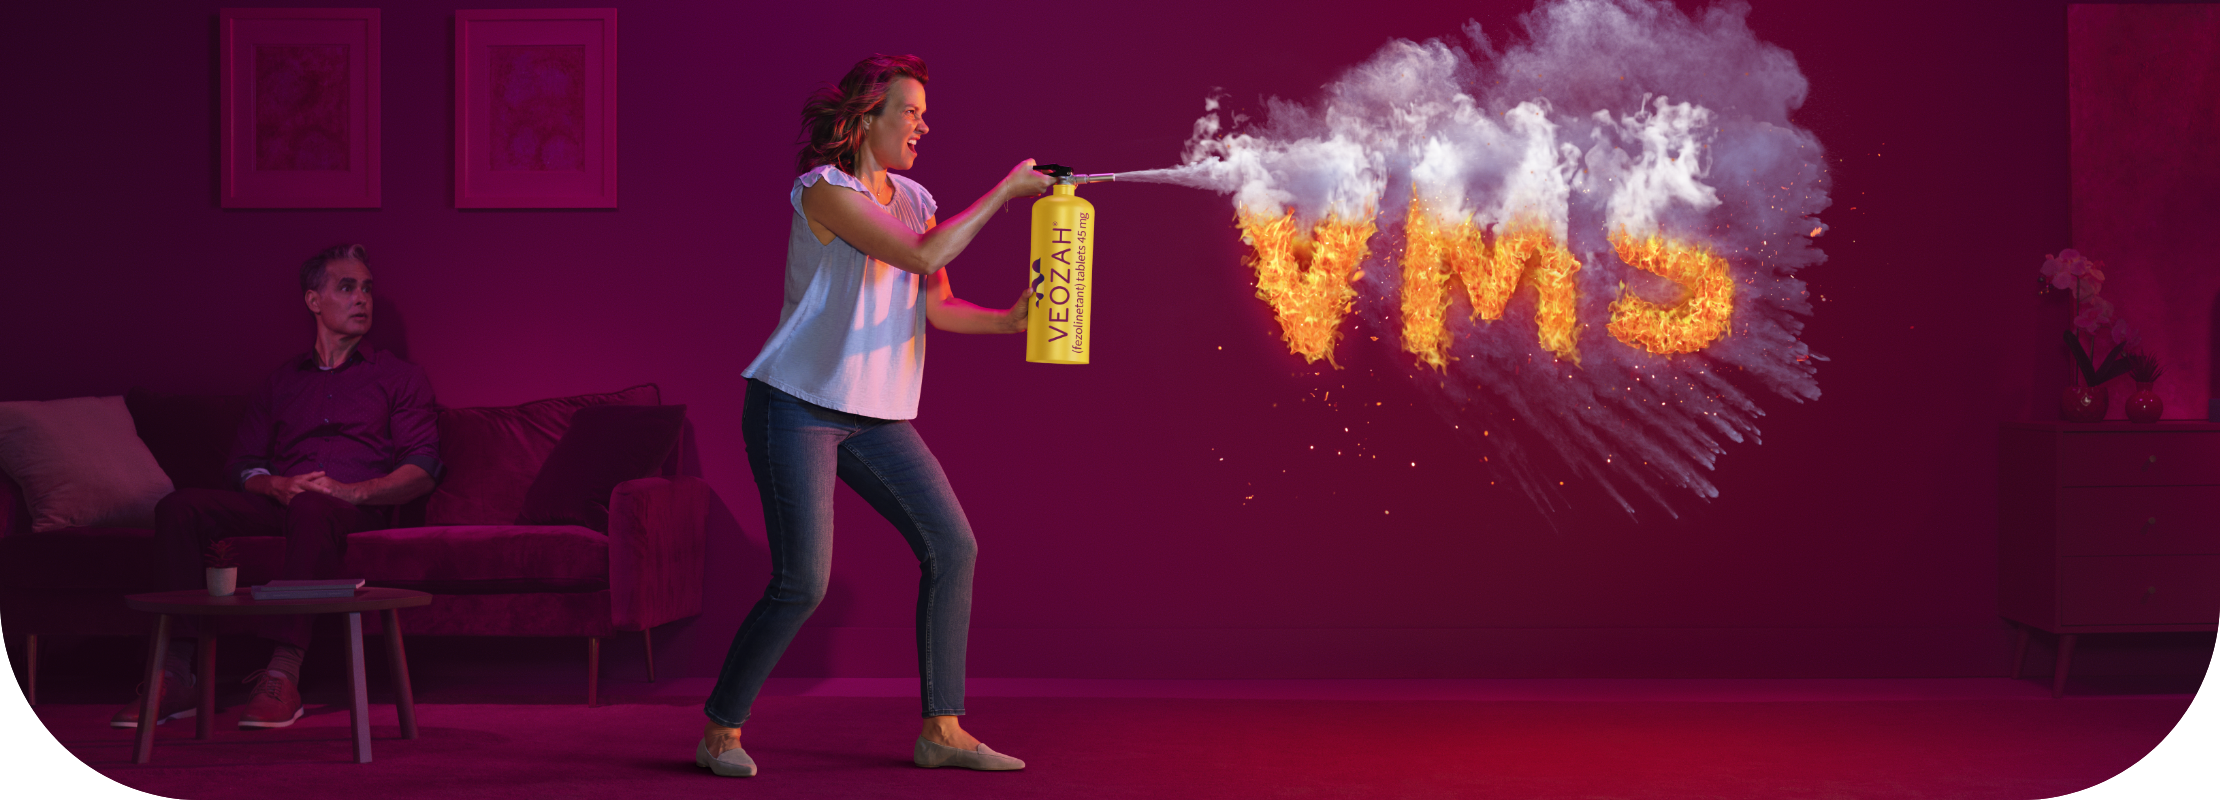 Woman spraying VEOZAH® (fezolinetant) logo fire extinguisher at VMS fire in living room with man sitting and watching